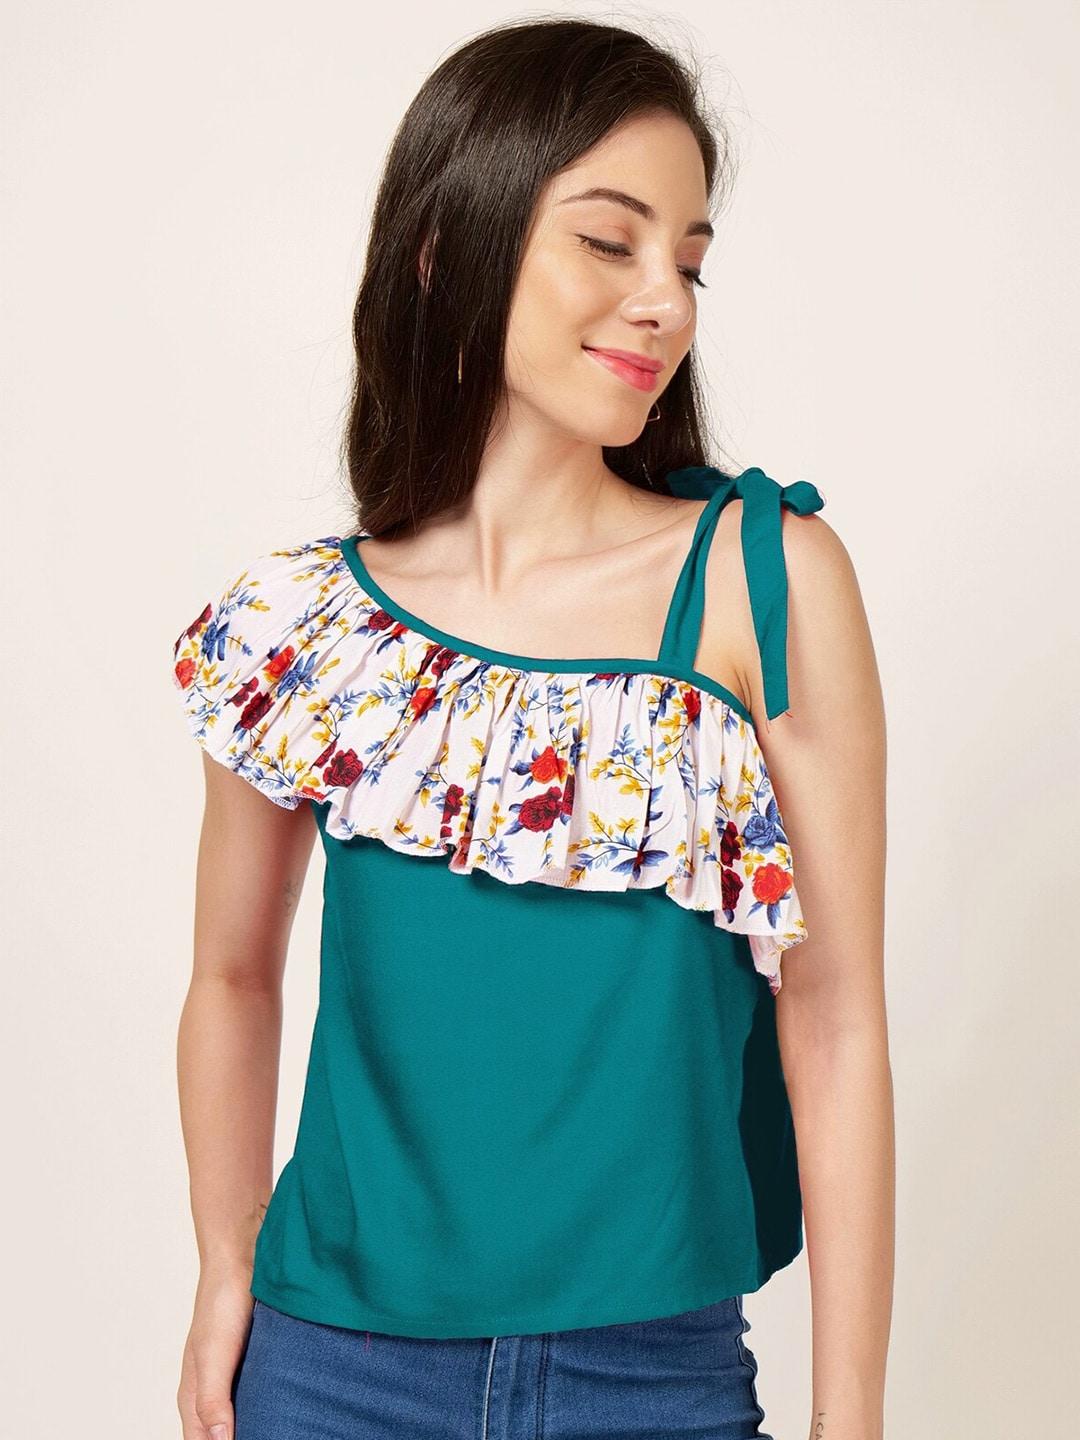 patrorna-floral-printed-one-shoulder-ruffle-cotton-top